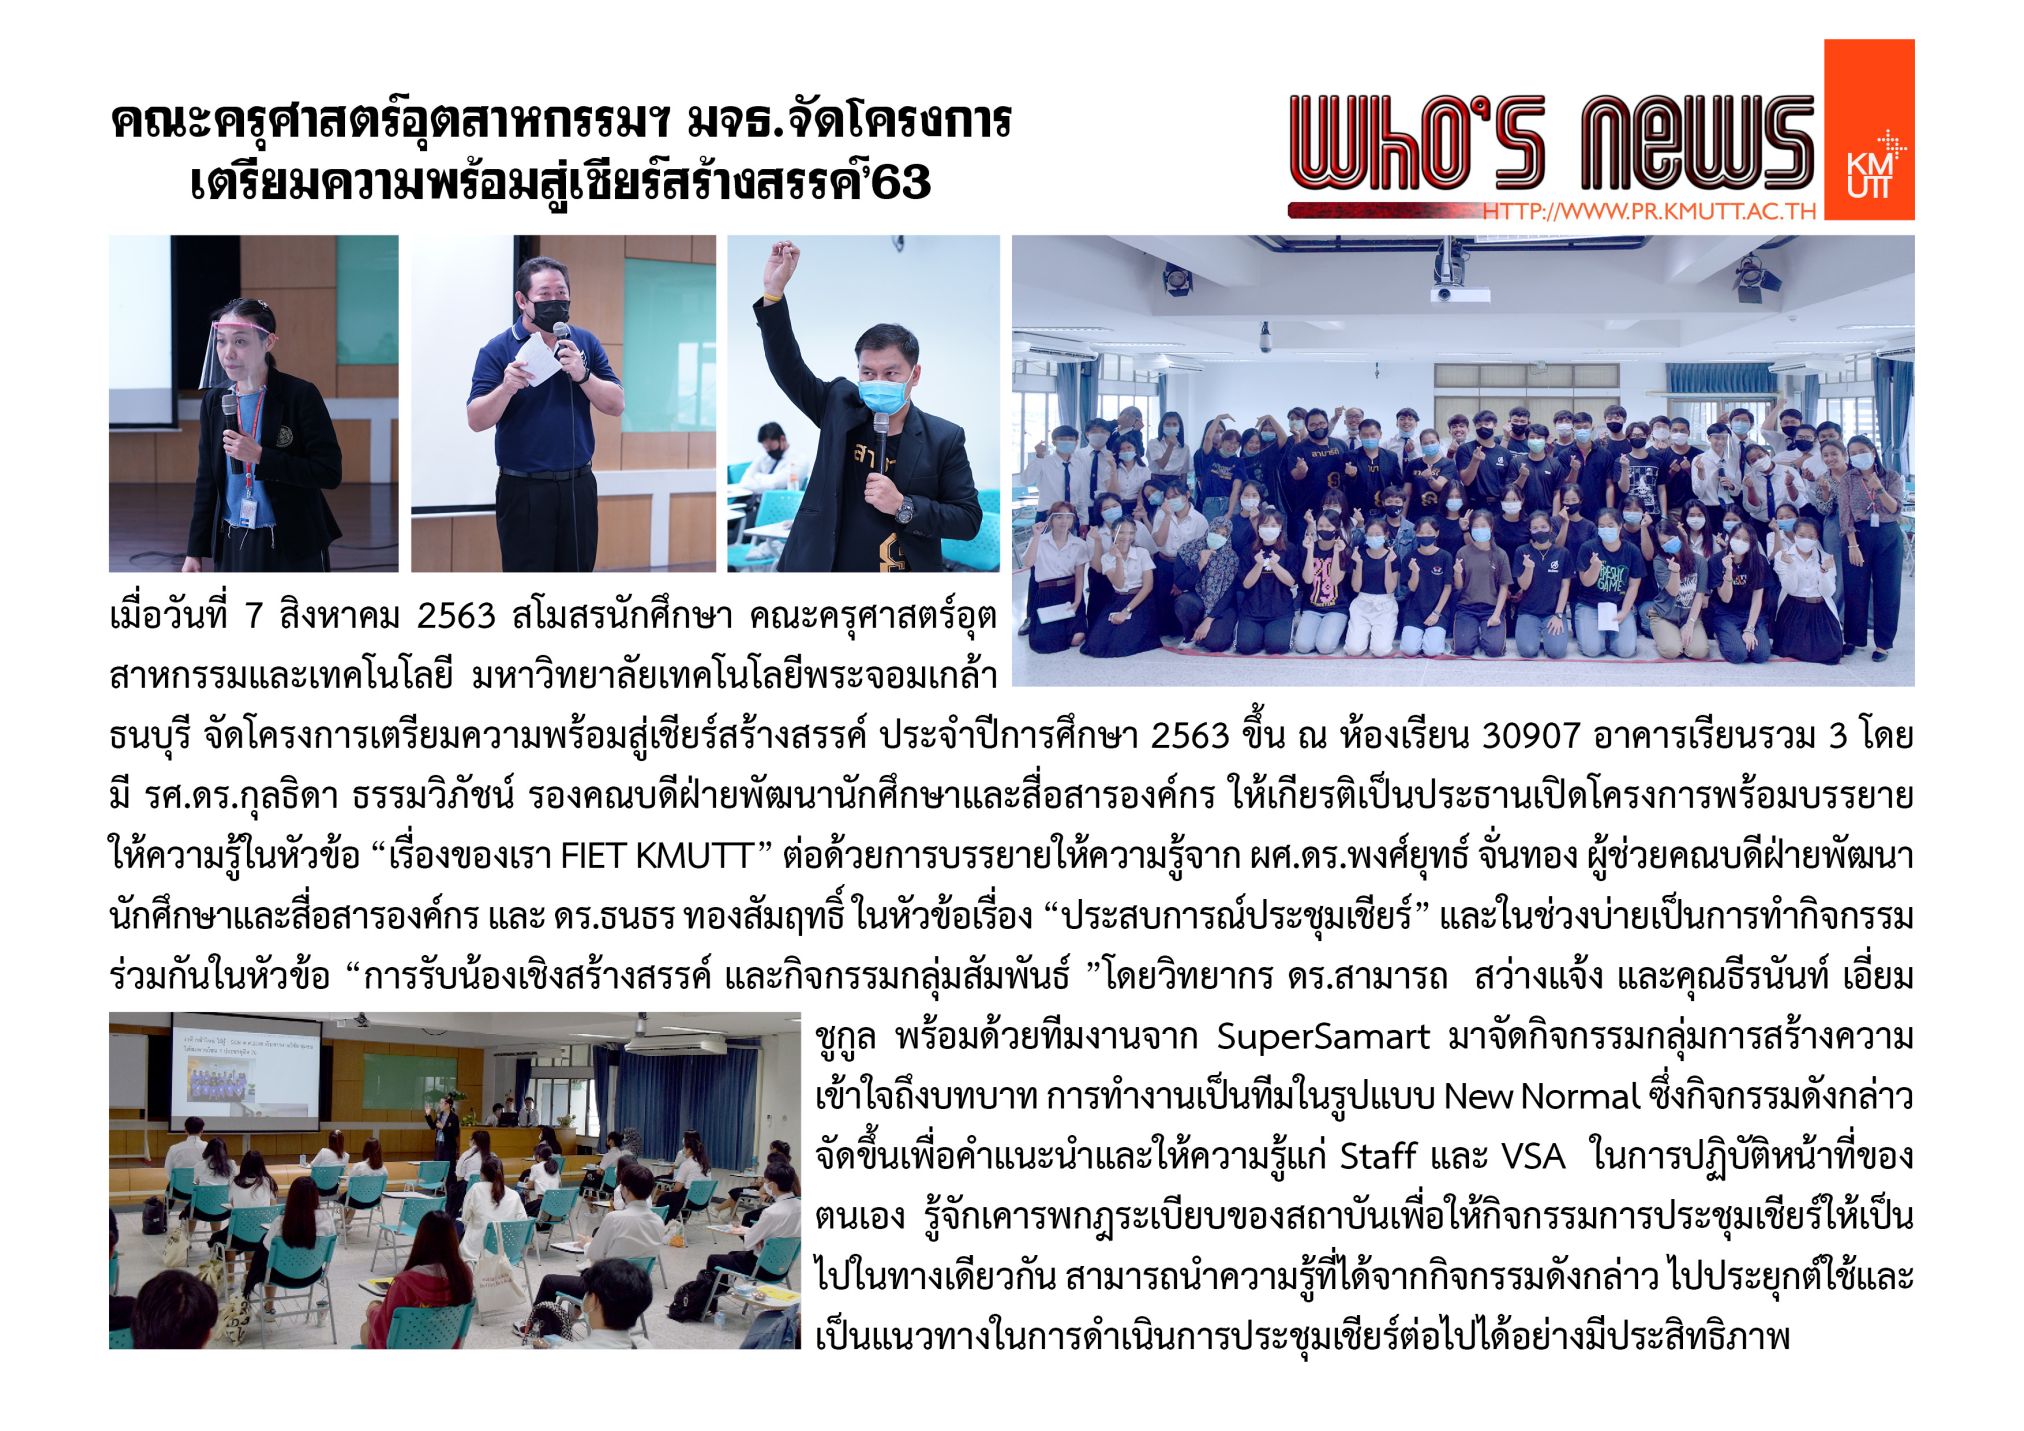 Faculty of Industrial Education and Technology, KMUTT held Project to preparing on creative meeting of year 2020